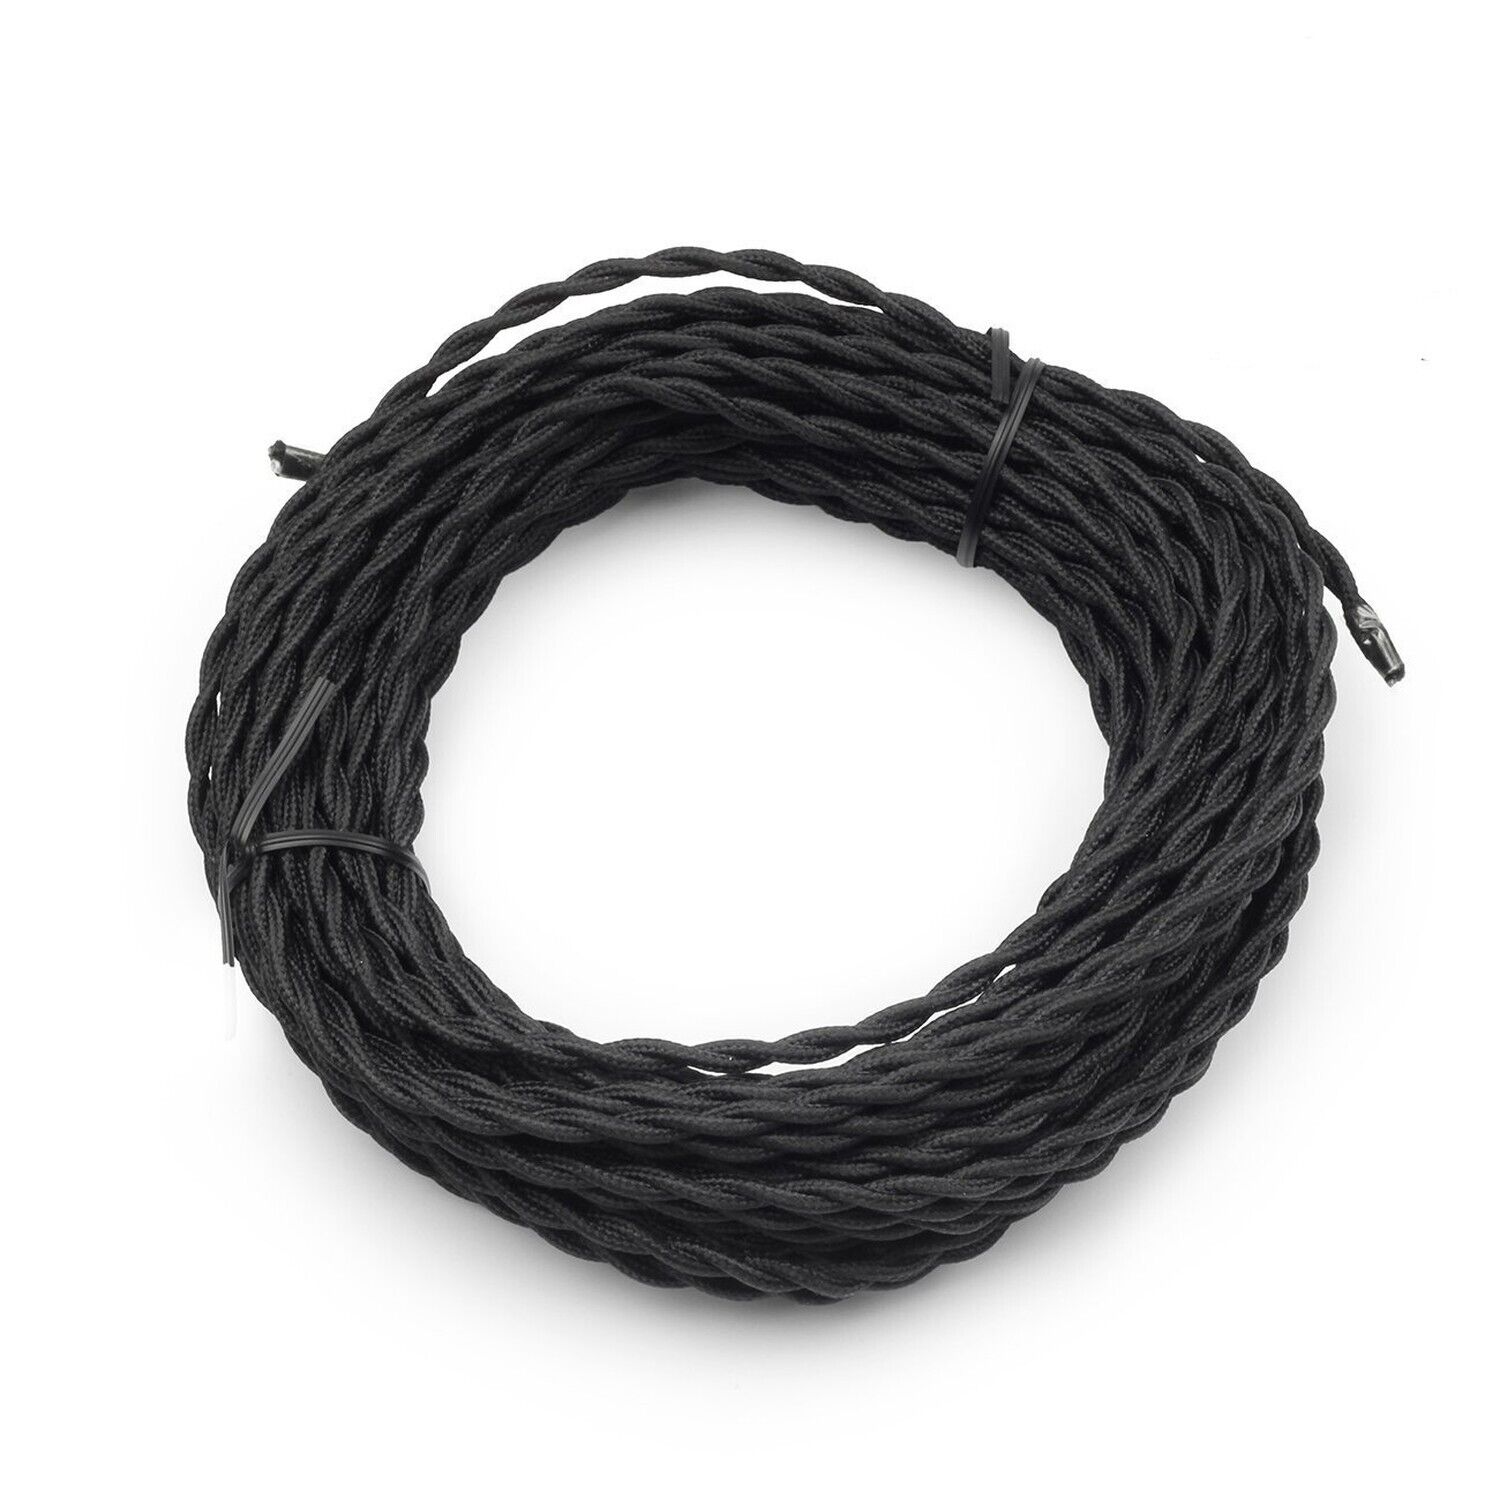 Black Twisted Cloth Covered Wire, 2-Conductor 18-Gauge Antique Industrial Fab...